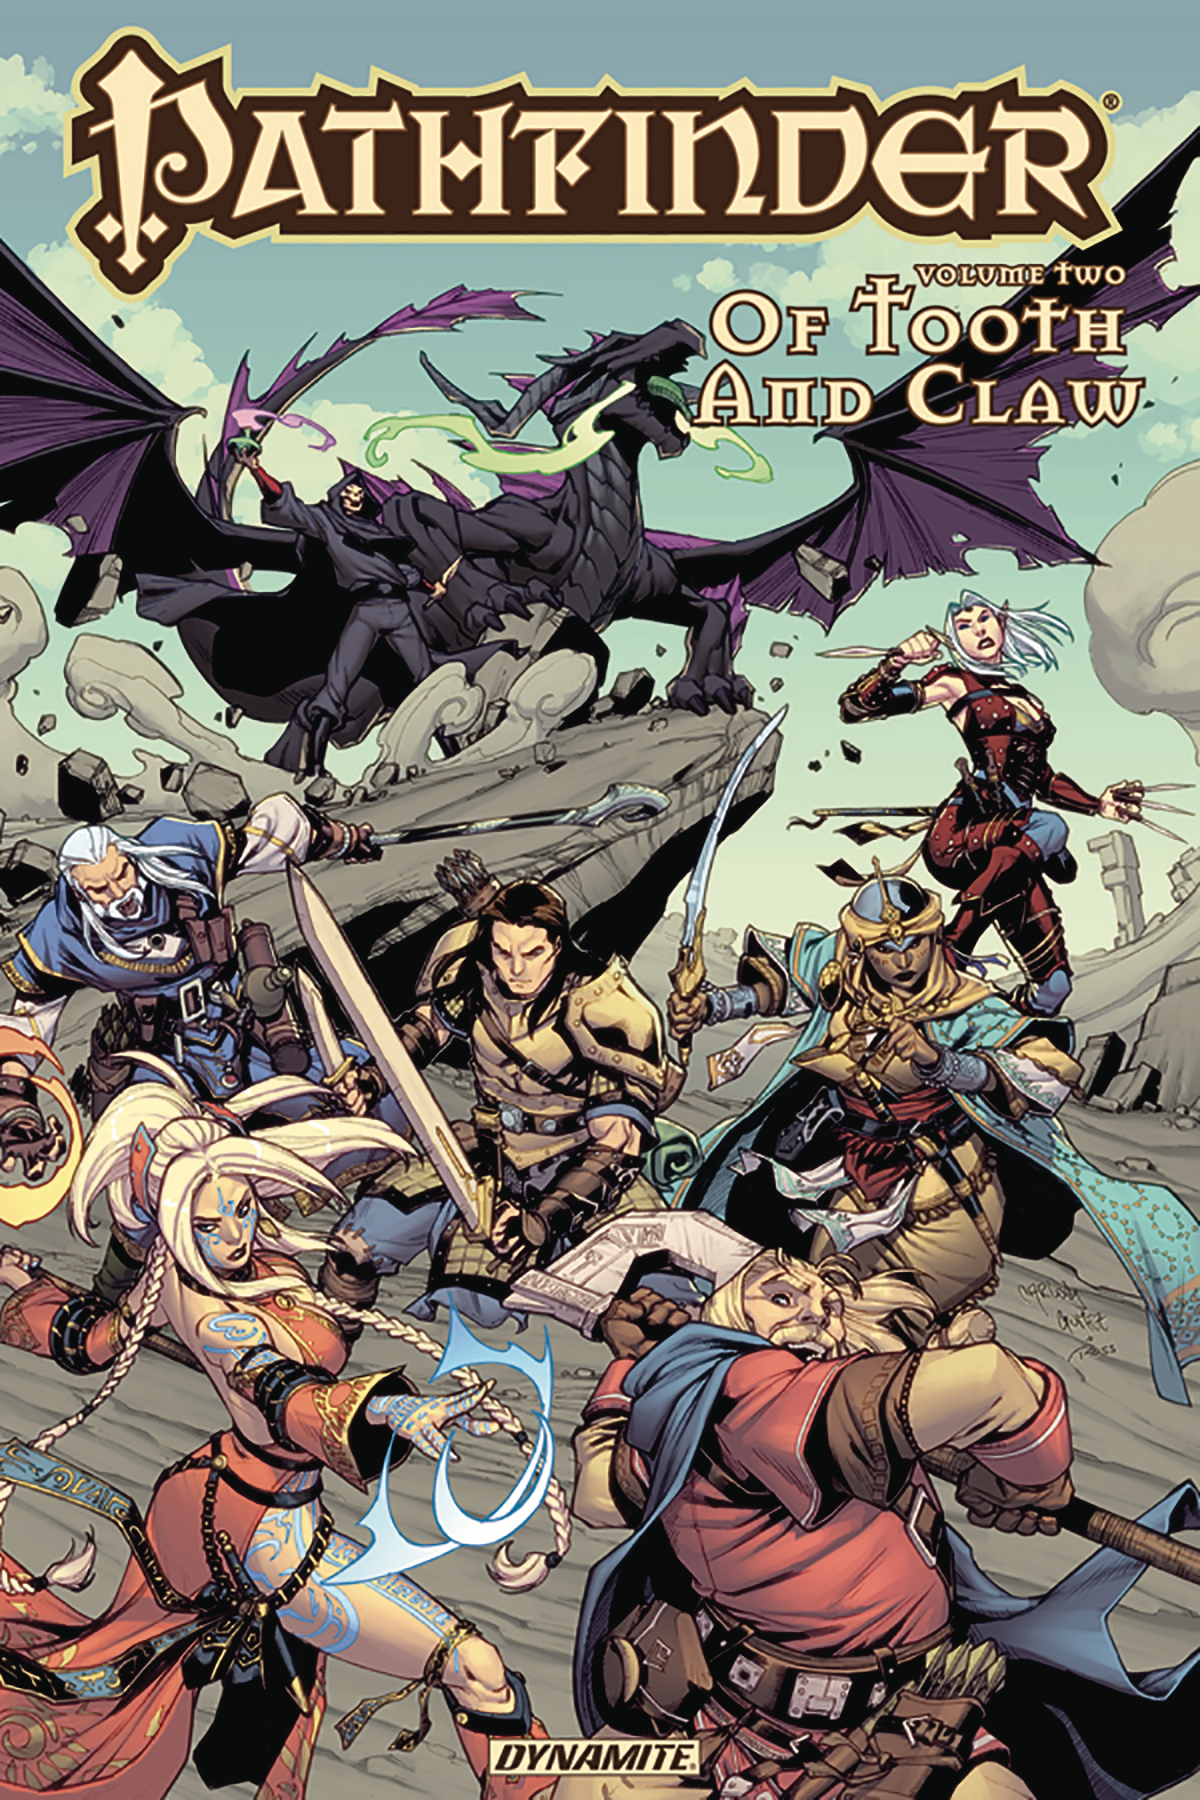 Pathfinder Graphic Novel Volume 2 of Tooth And Claw